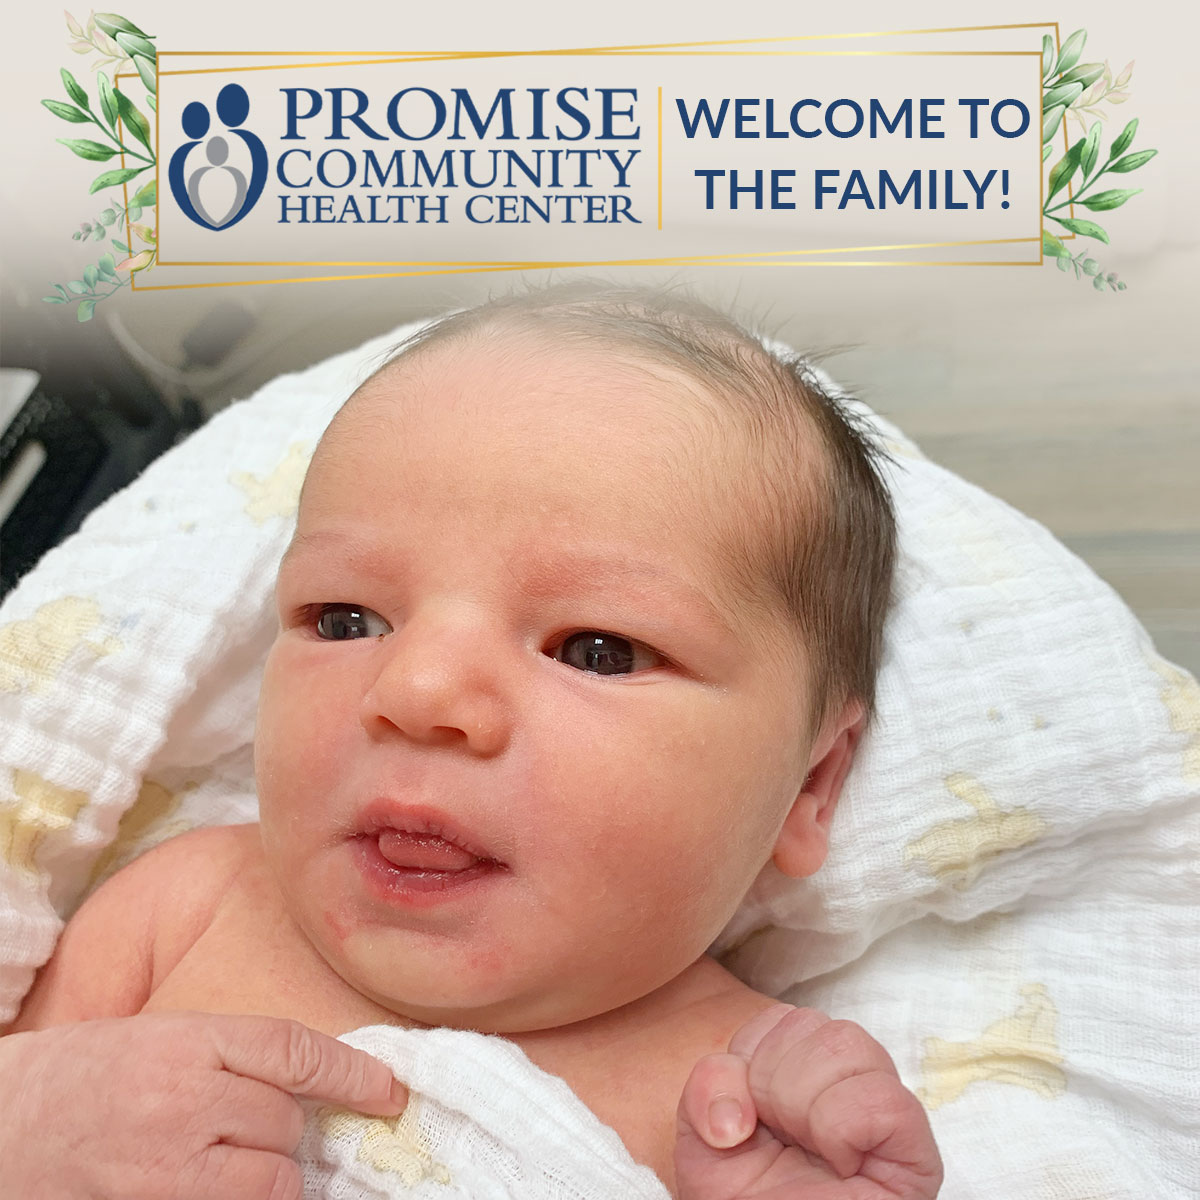 Home birth in Sioux City, Iowa |Promise Community Health Center in Sioux Center, Iowa | Home births in northwest Iowa, Home births in southeast South Dakota, Home births in southwest Minnesota | Home births in Sioux Falls South Dakota, Home births in Beresford South Dakota, Home births in Sioux City IA, Home births in LeMars IA, Home births in Worthington MN, Home births in Iowa, Home births in South Dakota, Home births in Minnesota